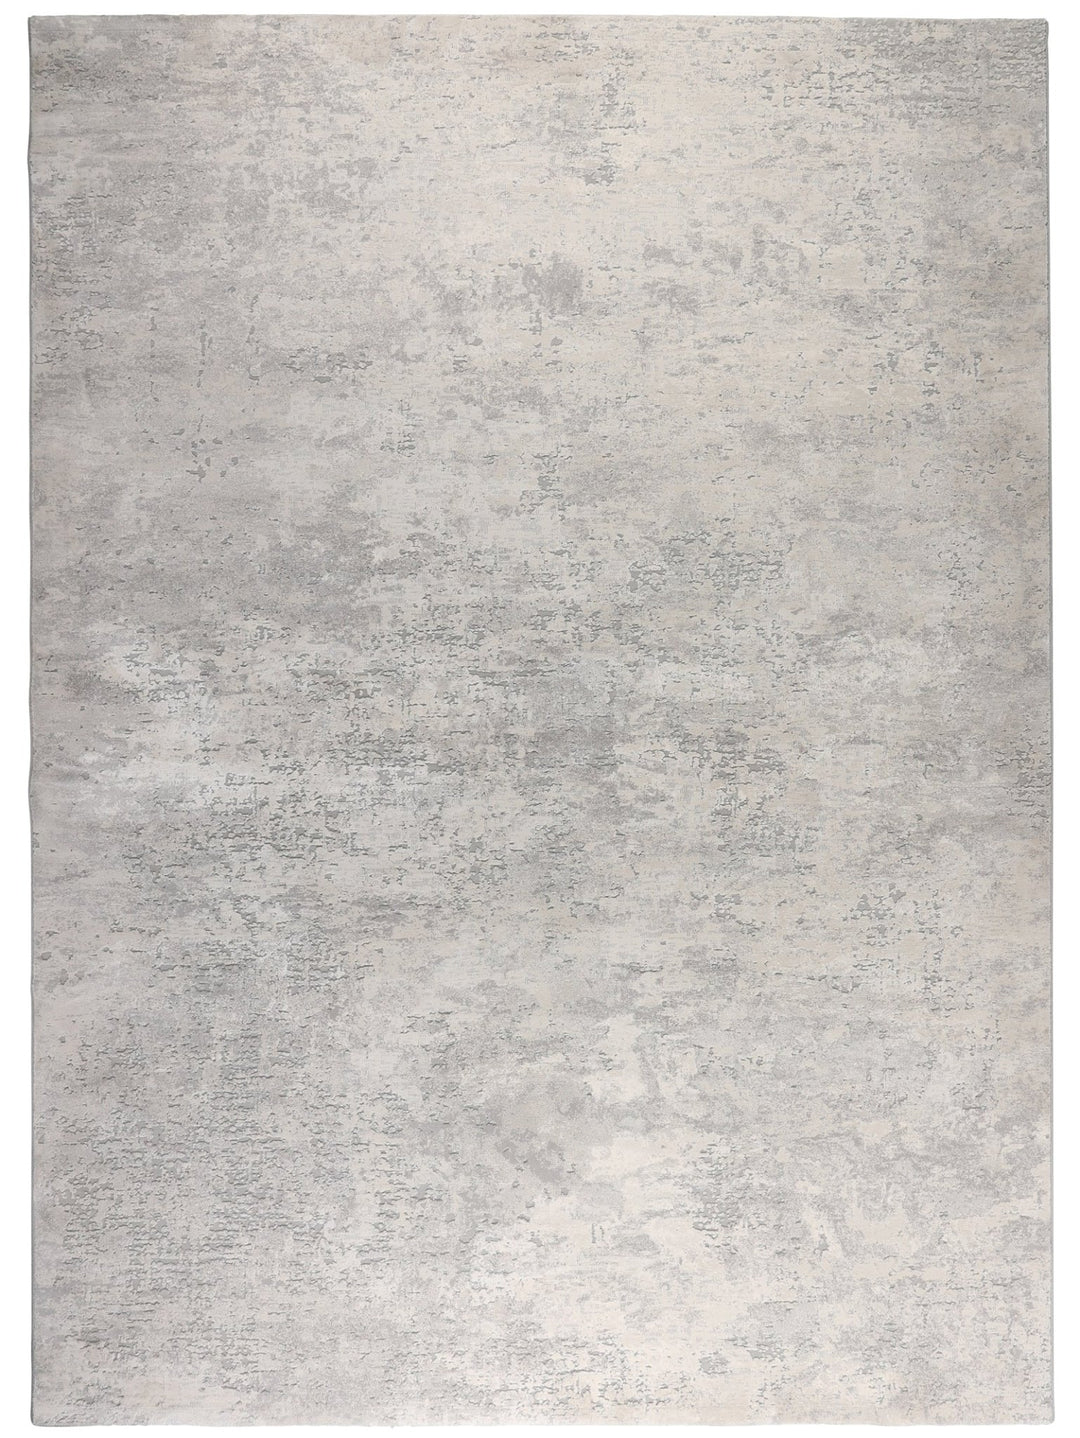 Infinity Rug in Morning Mist - Rugs - Hertex Haus - Abstract